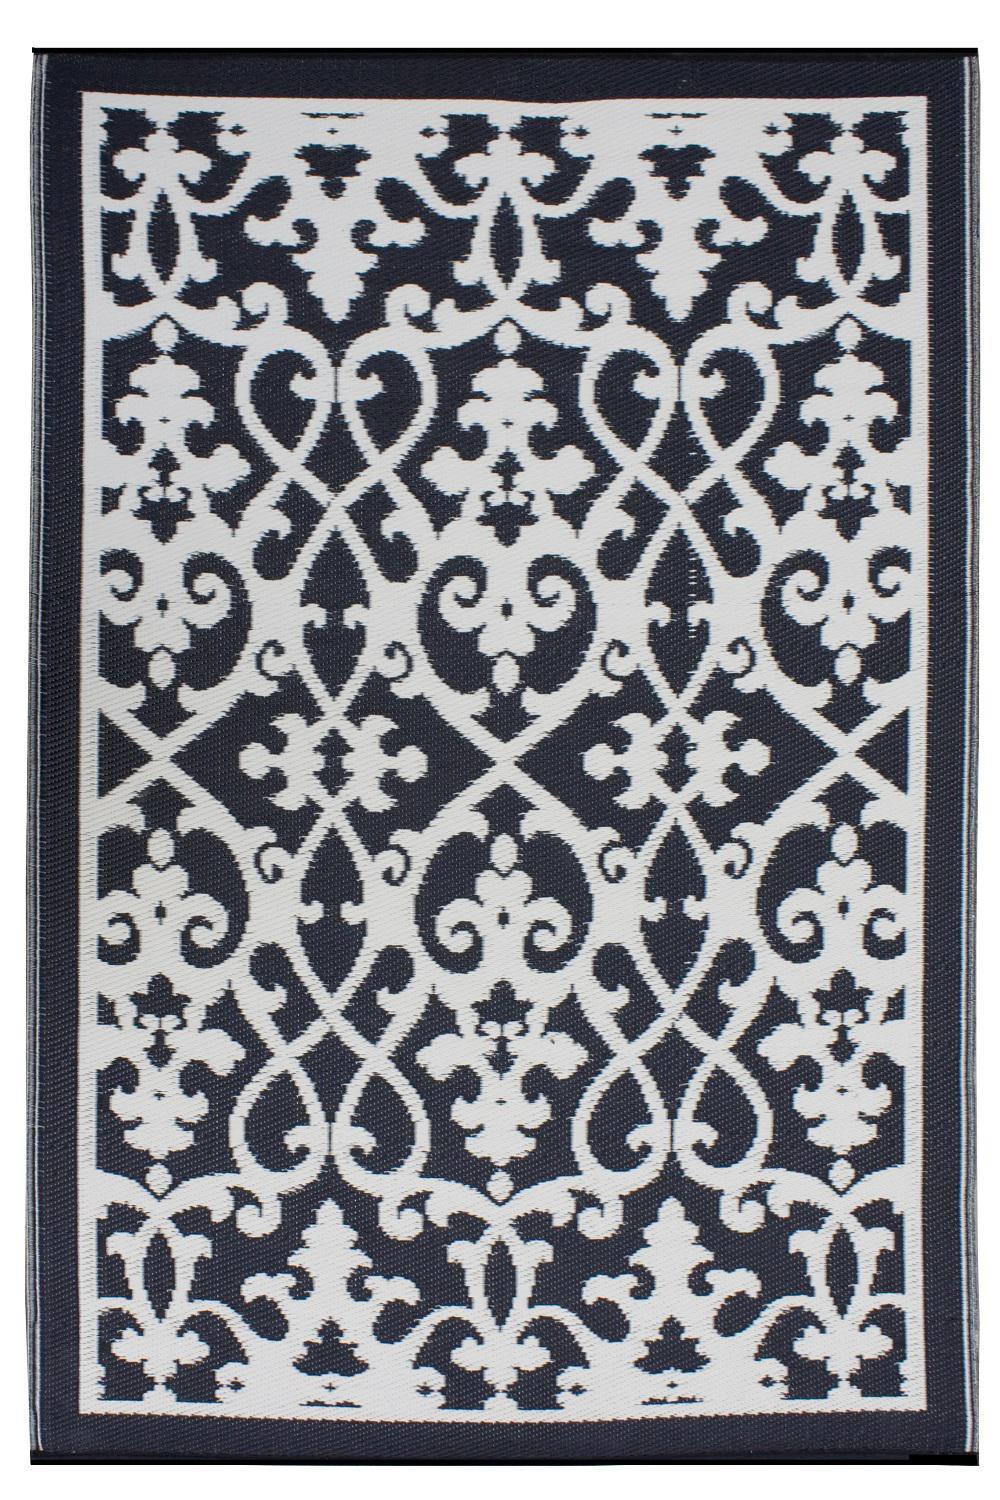 180x270cm Venice Black and Cream Recycled Plastic Outdoor Rug and Mat